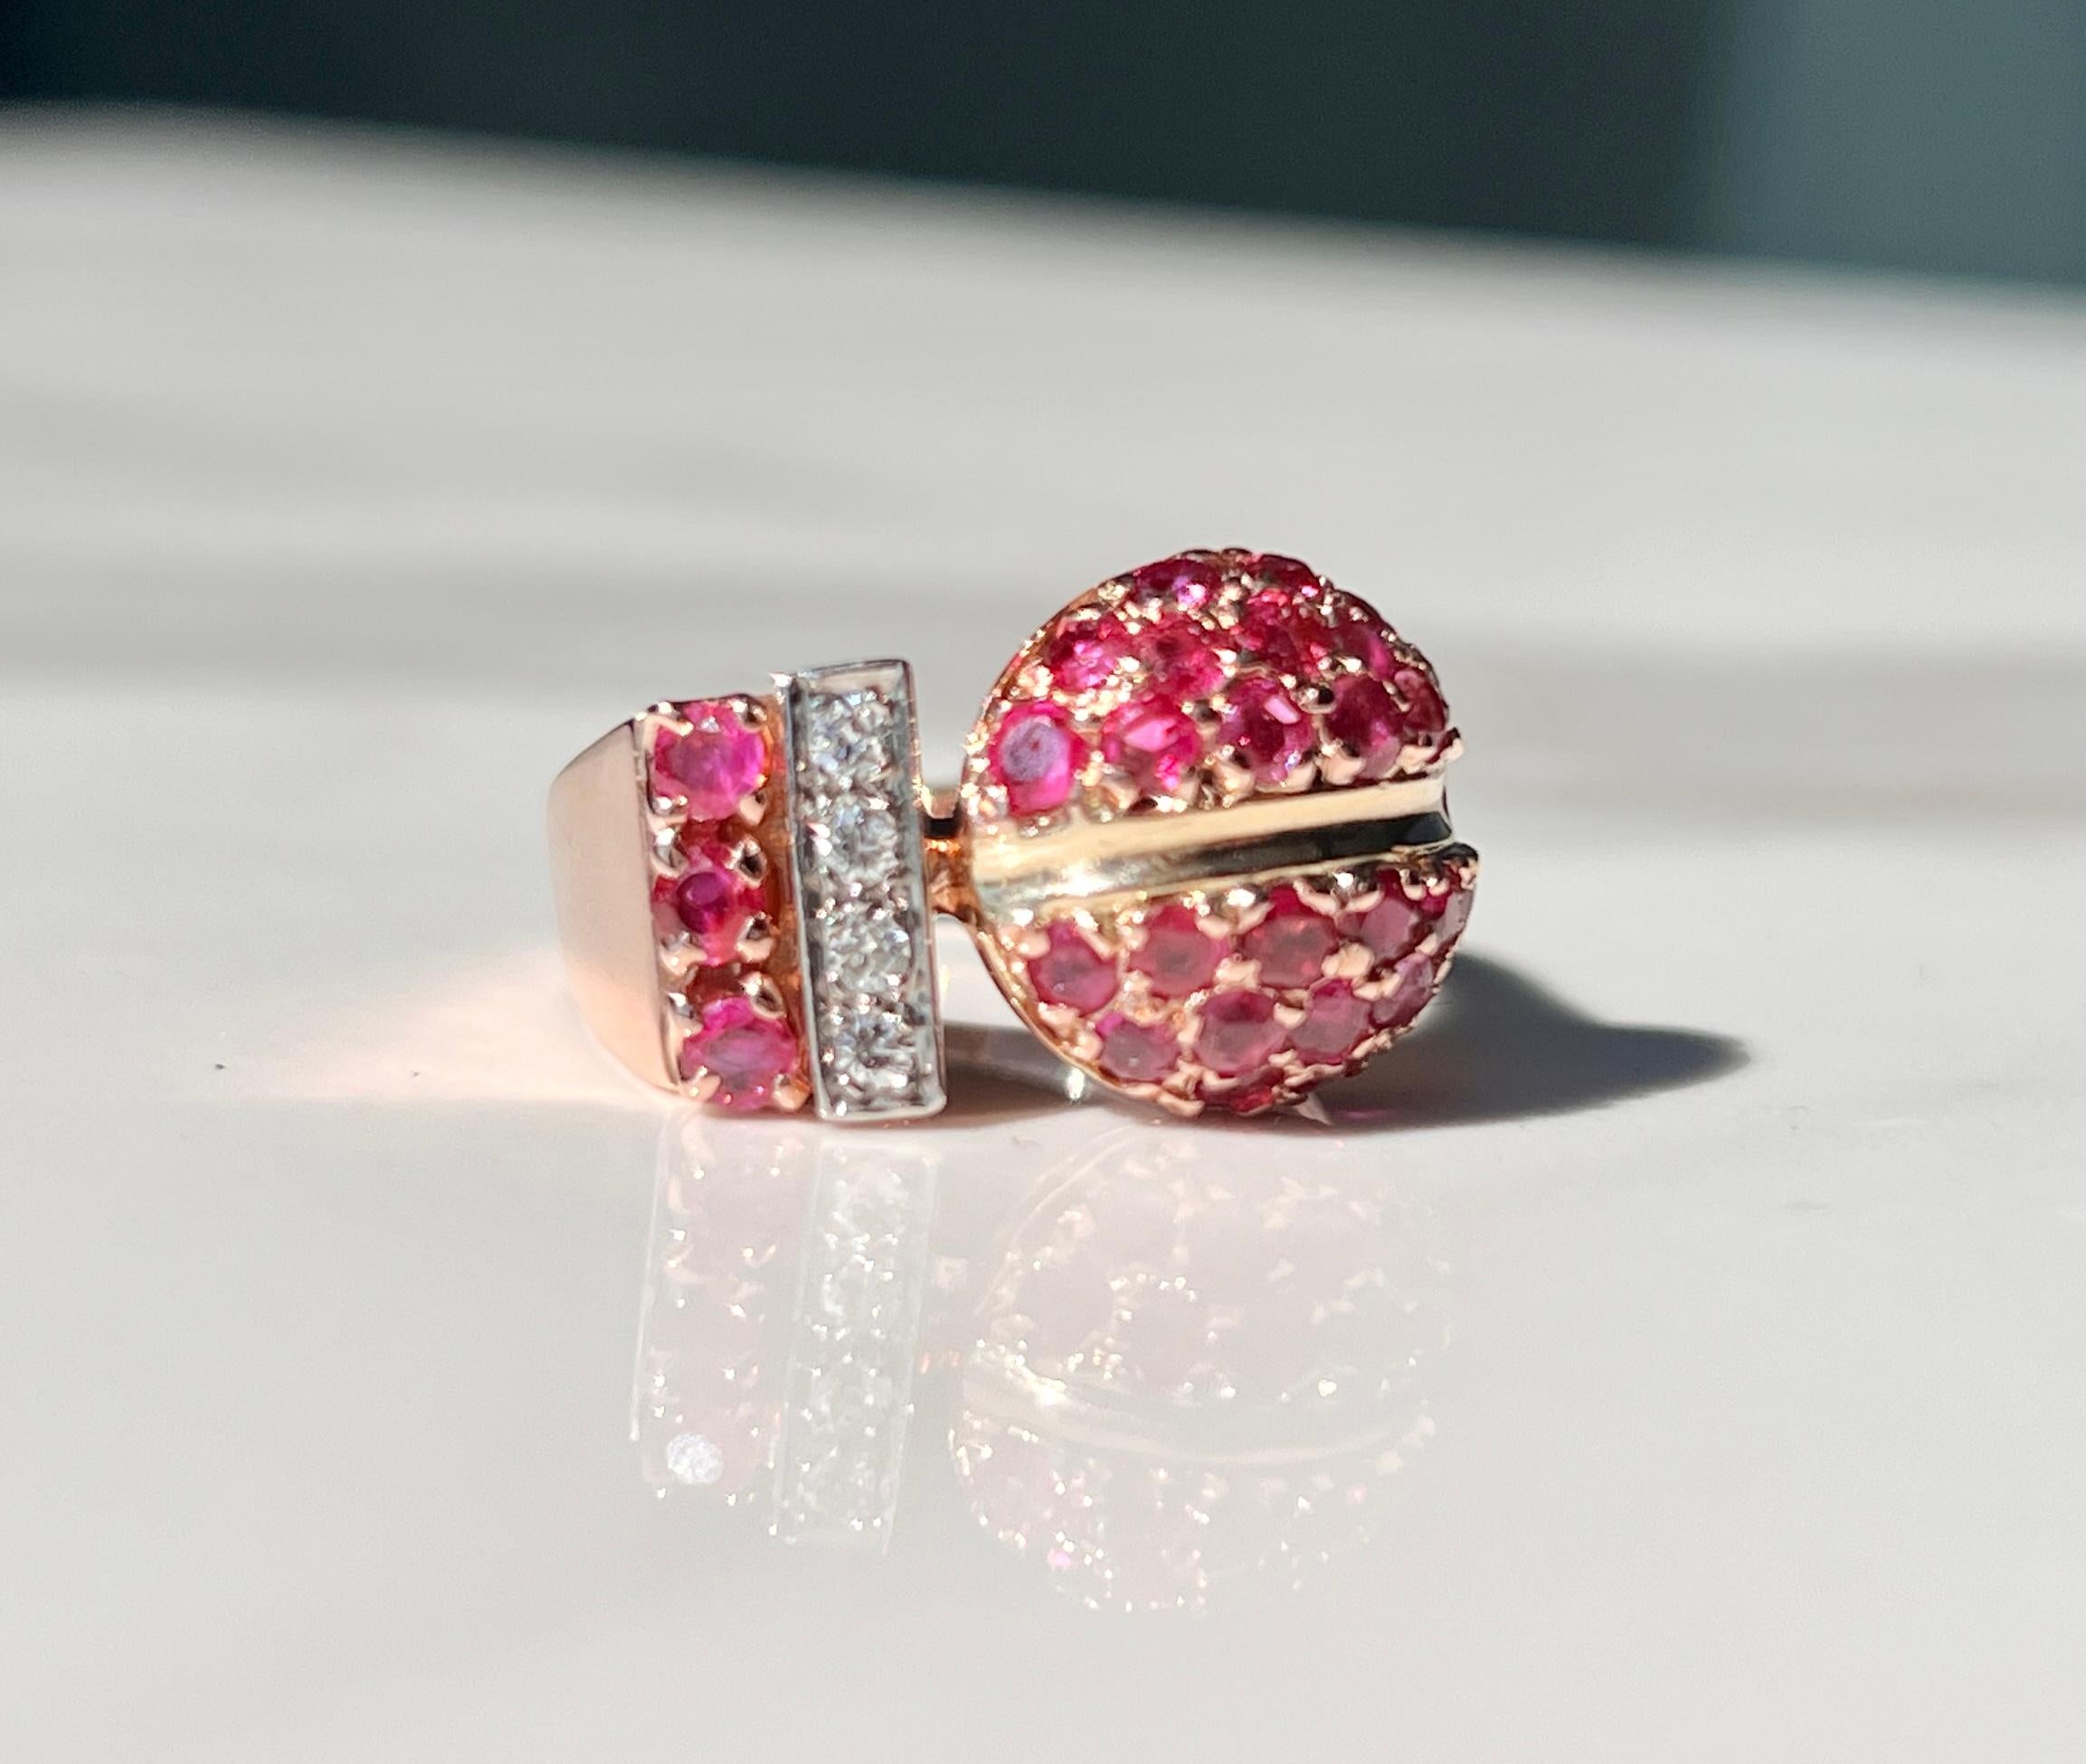 This retro ruby ring is ostentatious, bold and beautiful all wrapped into one. Handmade and crafted in solid rose gold and adorn with natural rubies and old cut diamonds. 

This emblematic ring is a truly bespoke piece of the 60 & 70's and cannot be